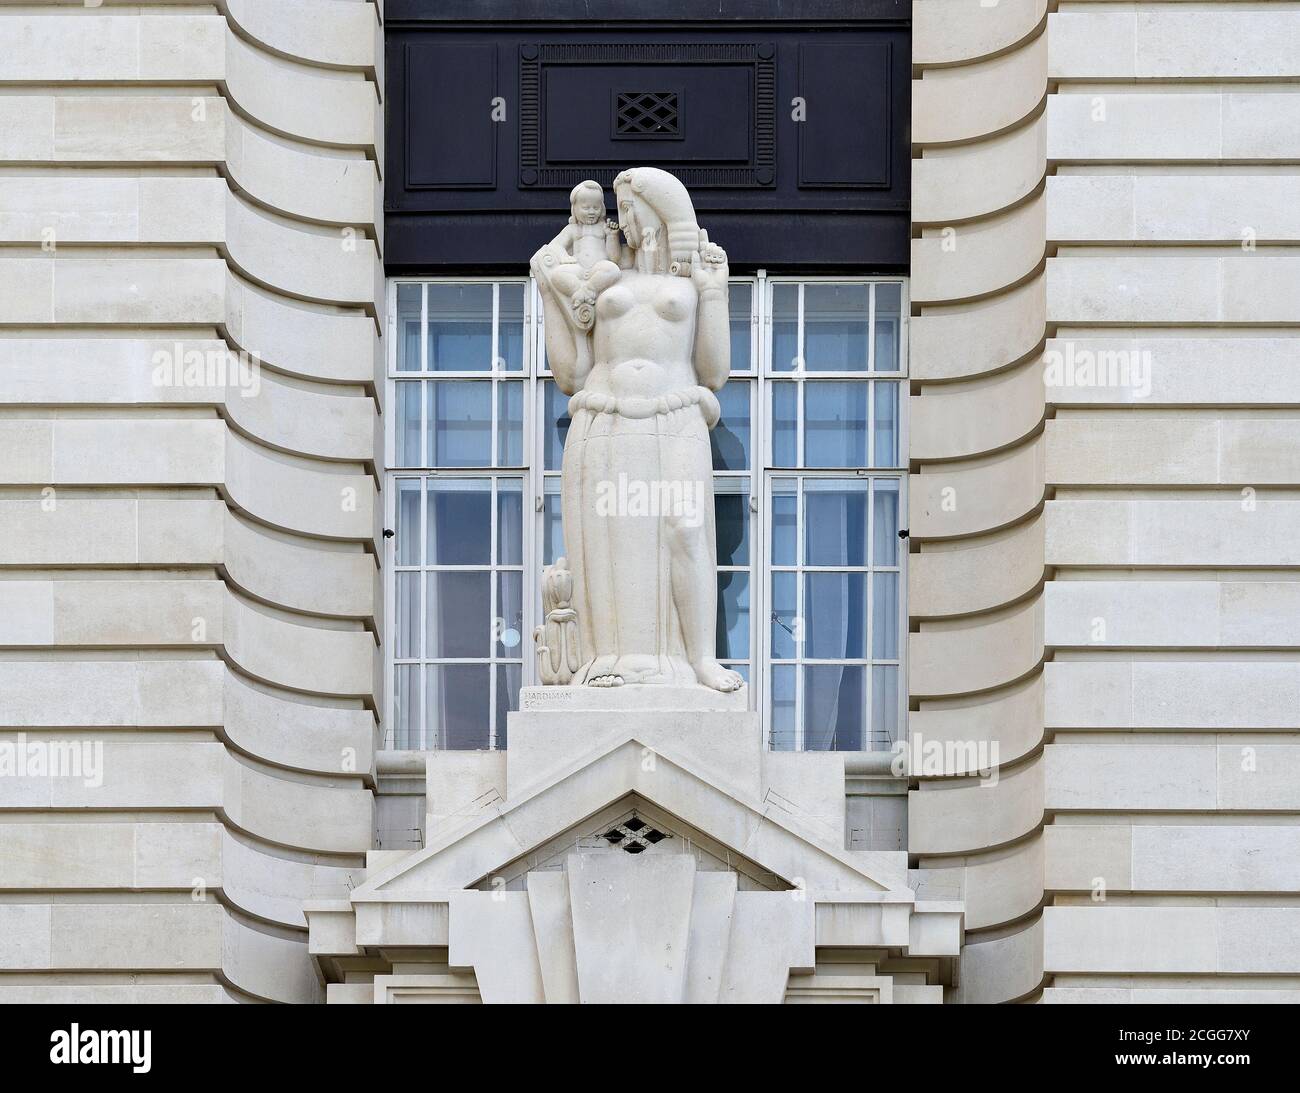 London, England, UK. Sculpture:'Child Education' by Alfred Hardiman, sculptor. 1921. Portland stone. on the West facade of County Hall on the South Ba Stock Photo